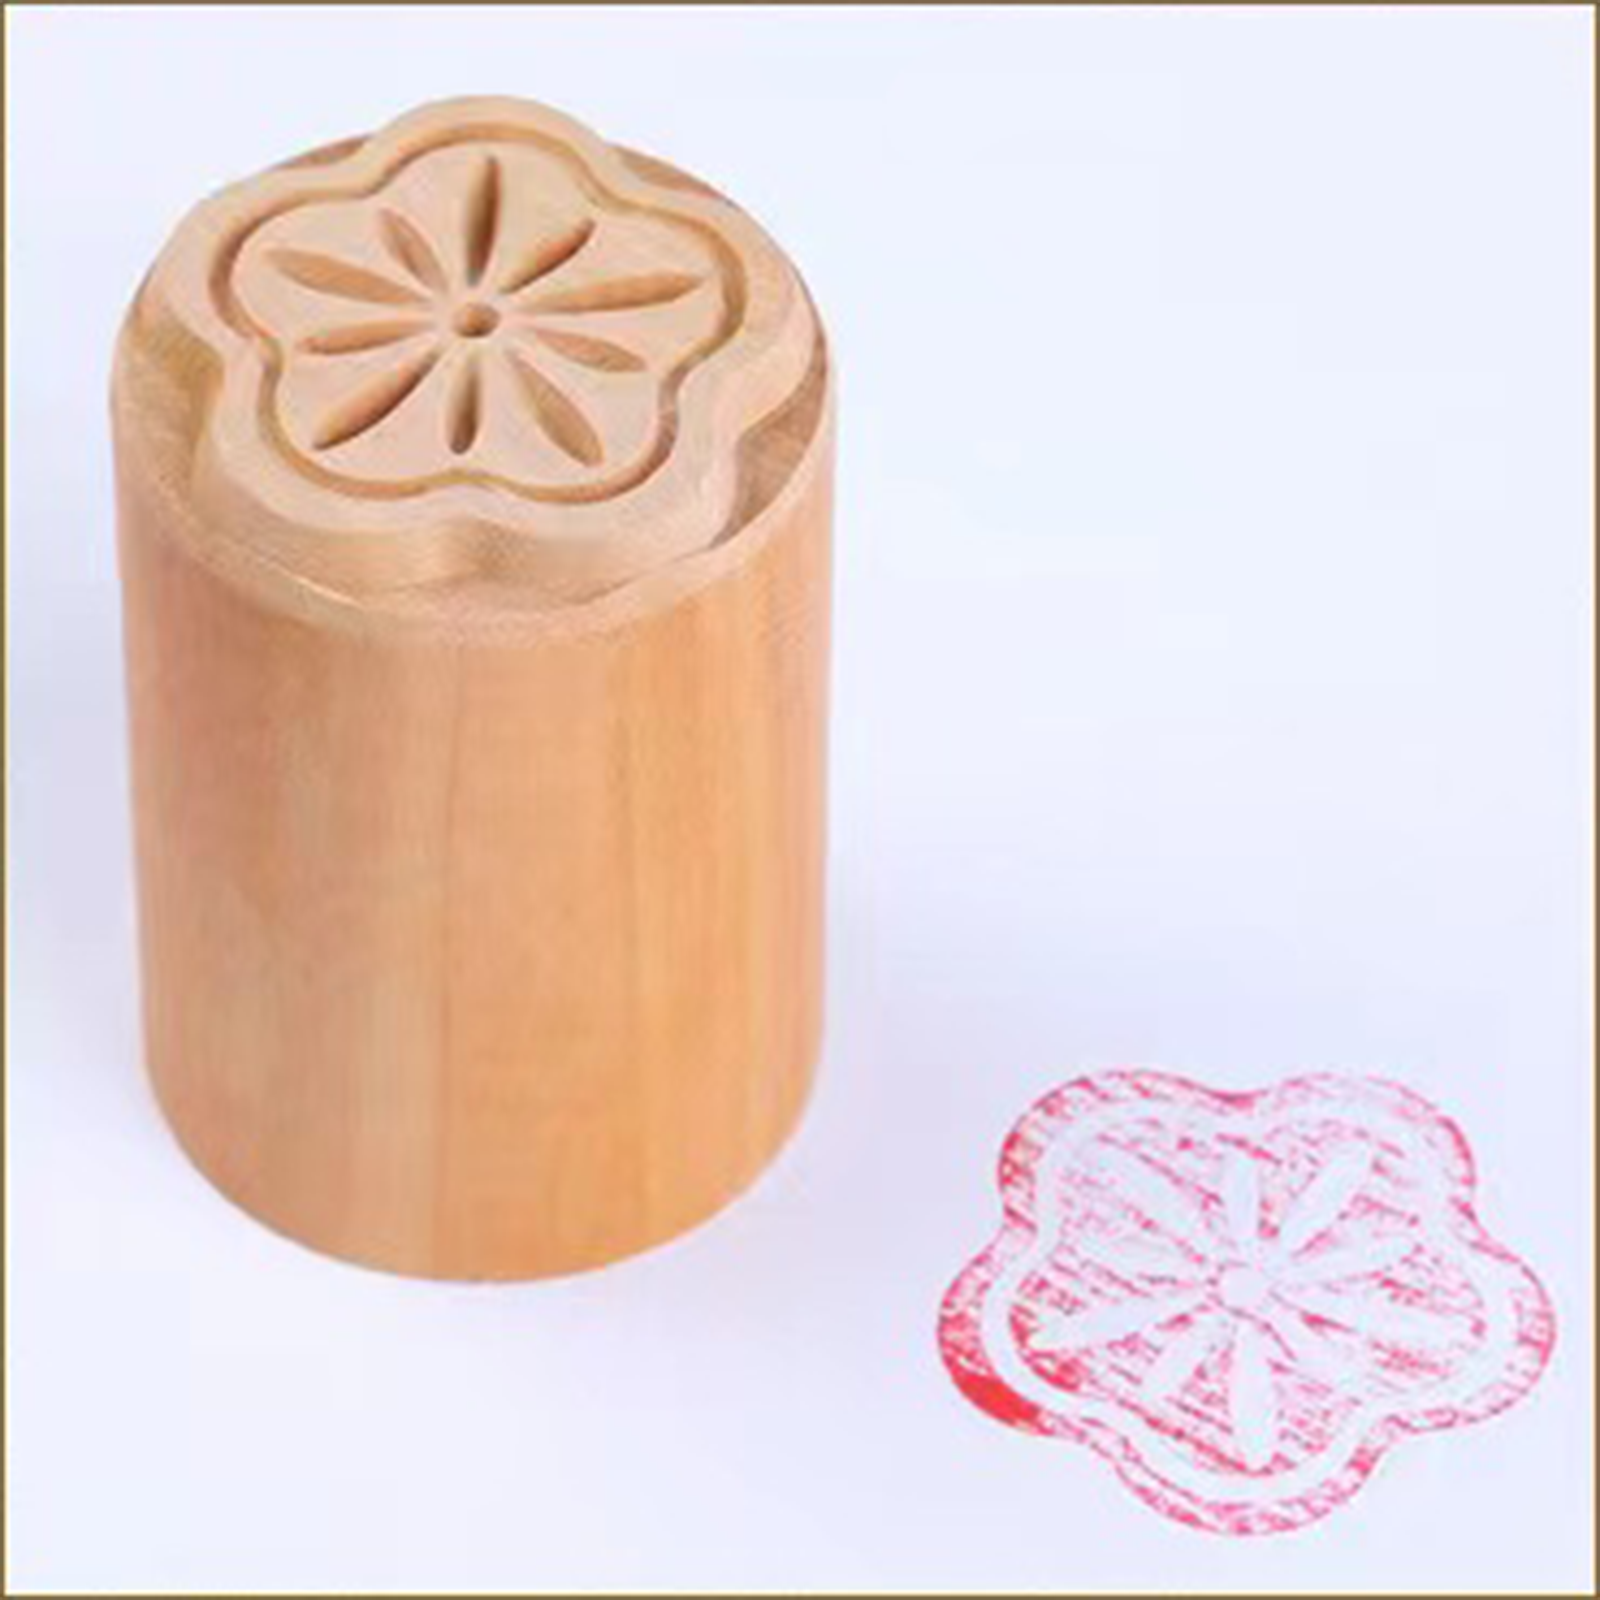 Wooden Stamp Set - For Mooncakes and Other Desserts